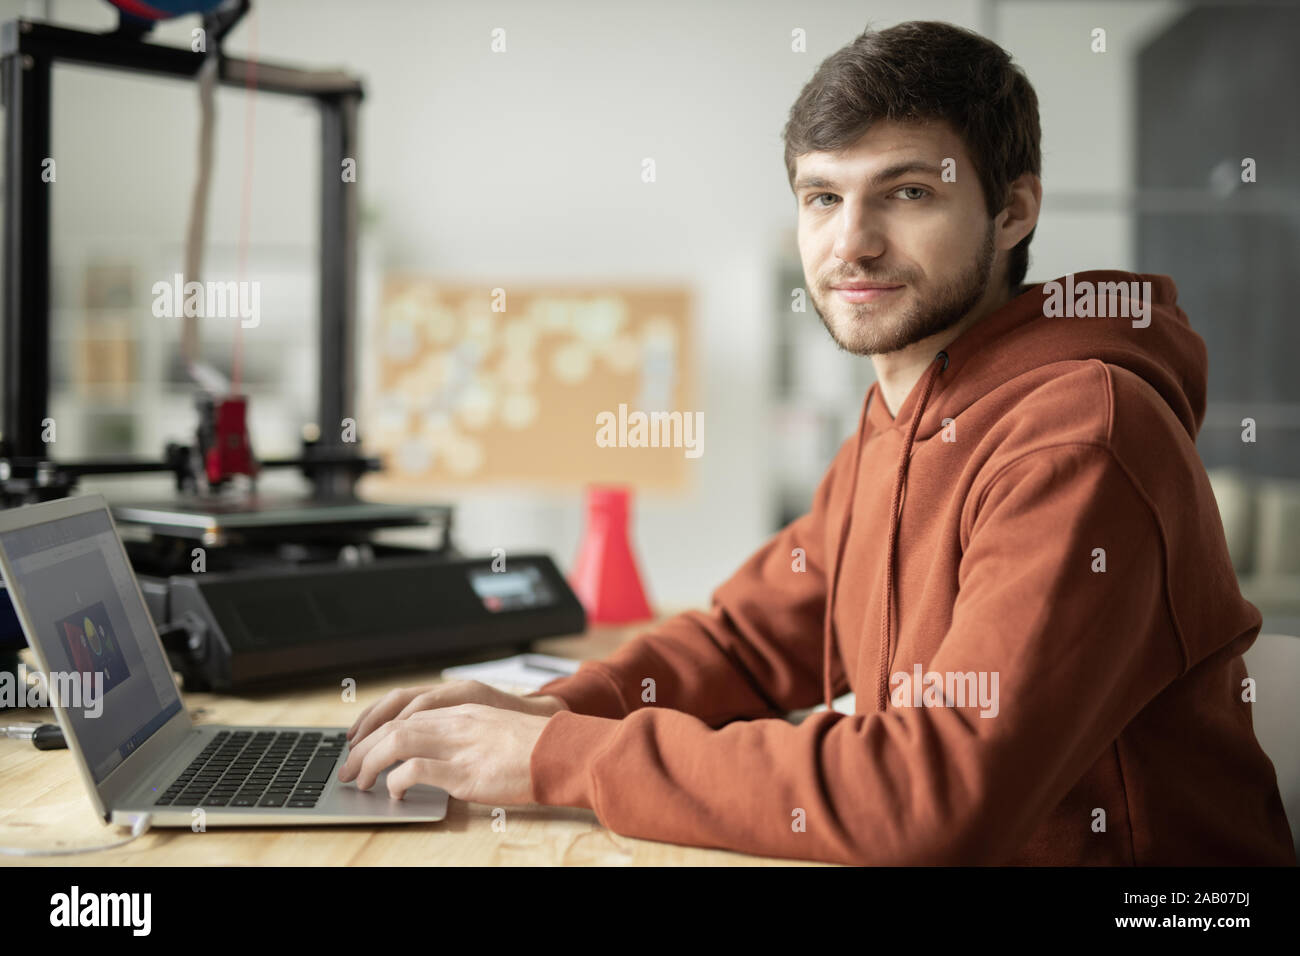 15,351 Person Sitting Behind Desk Images, Stock Photos, 3D objects